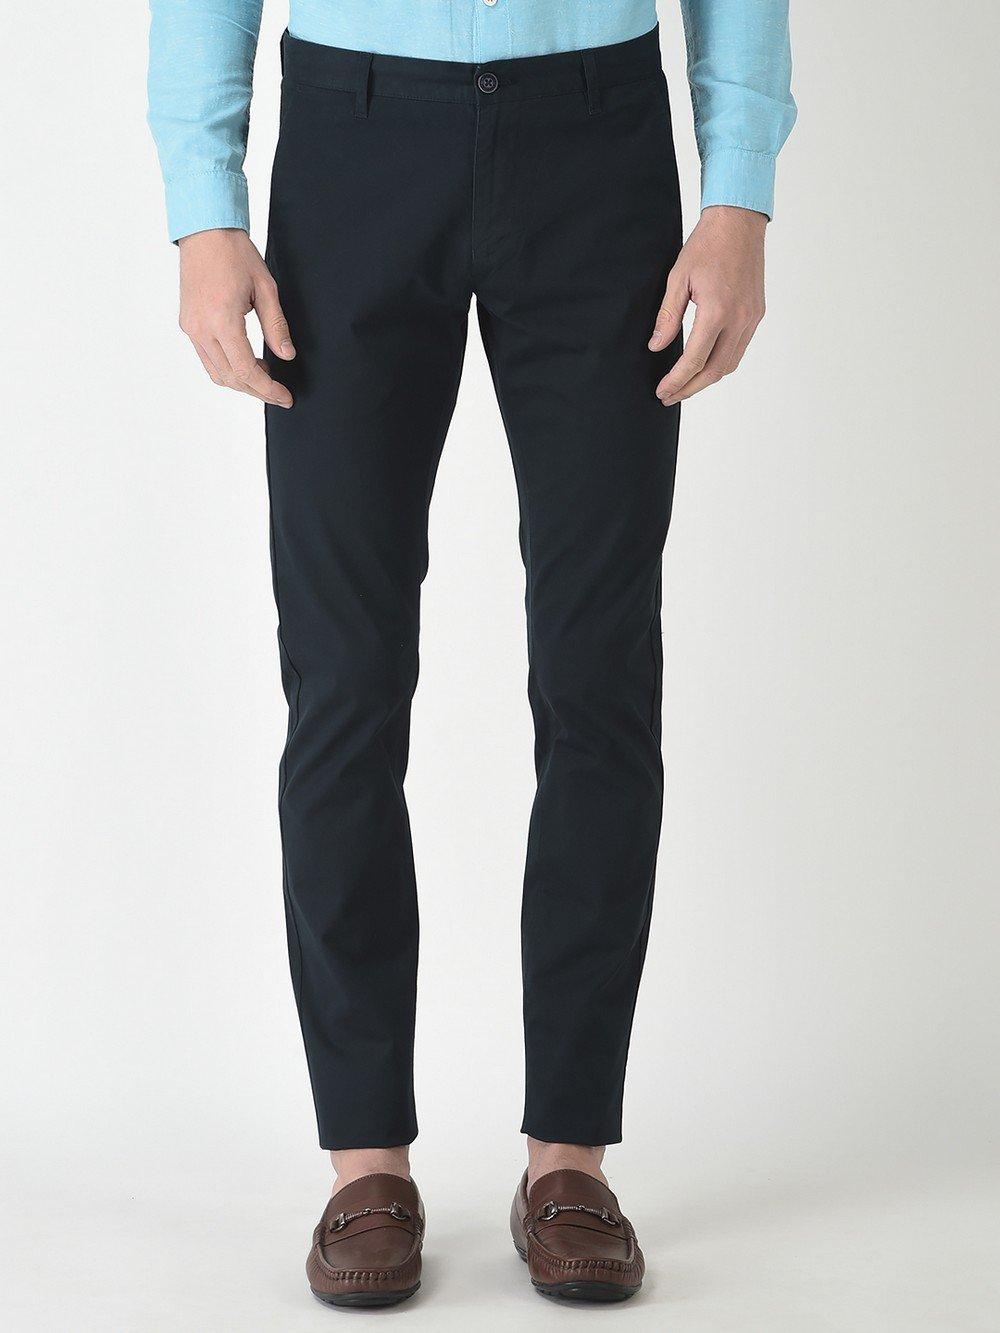 Cotrise Pant Lounge Trousers - Buy Cotrise Pant Lounge Trousers online in  India